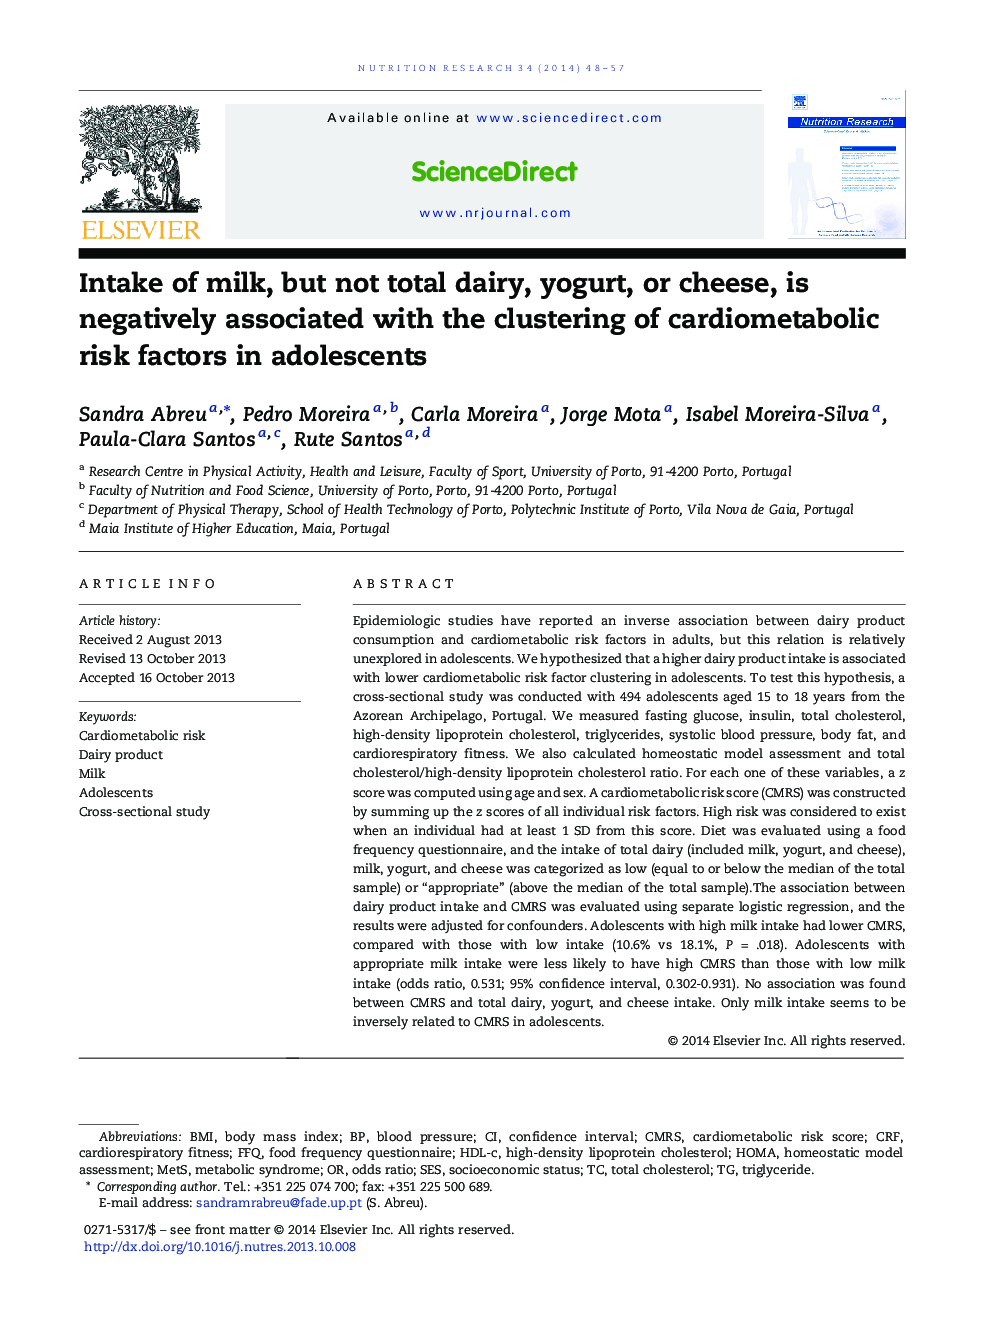 Intake of milk, but not total dairy, yogurt, or cheese, is negatively associated with the clustering of cardiometabolic risk factors in adolescents